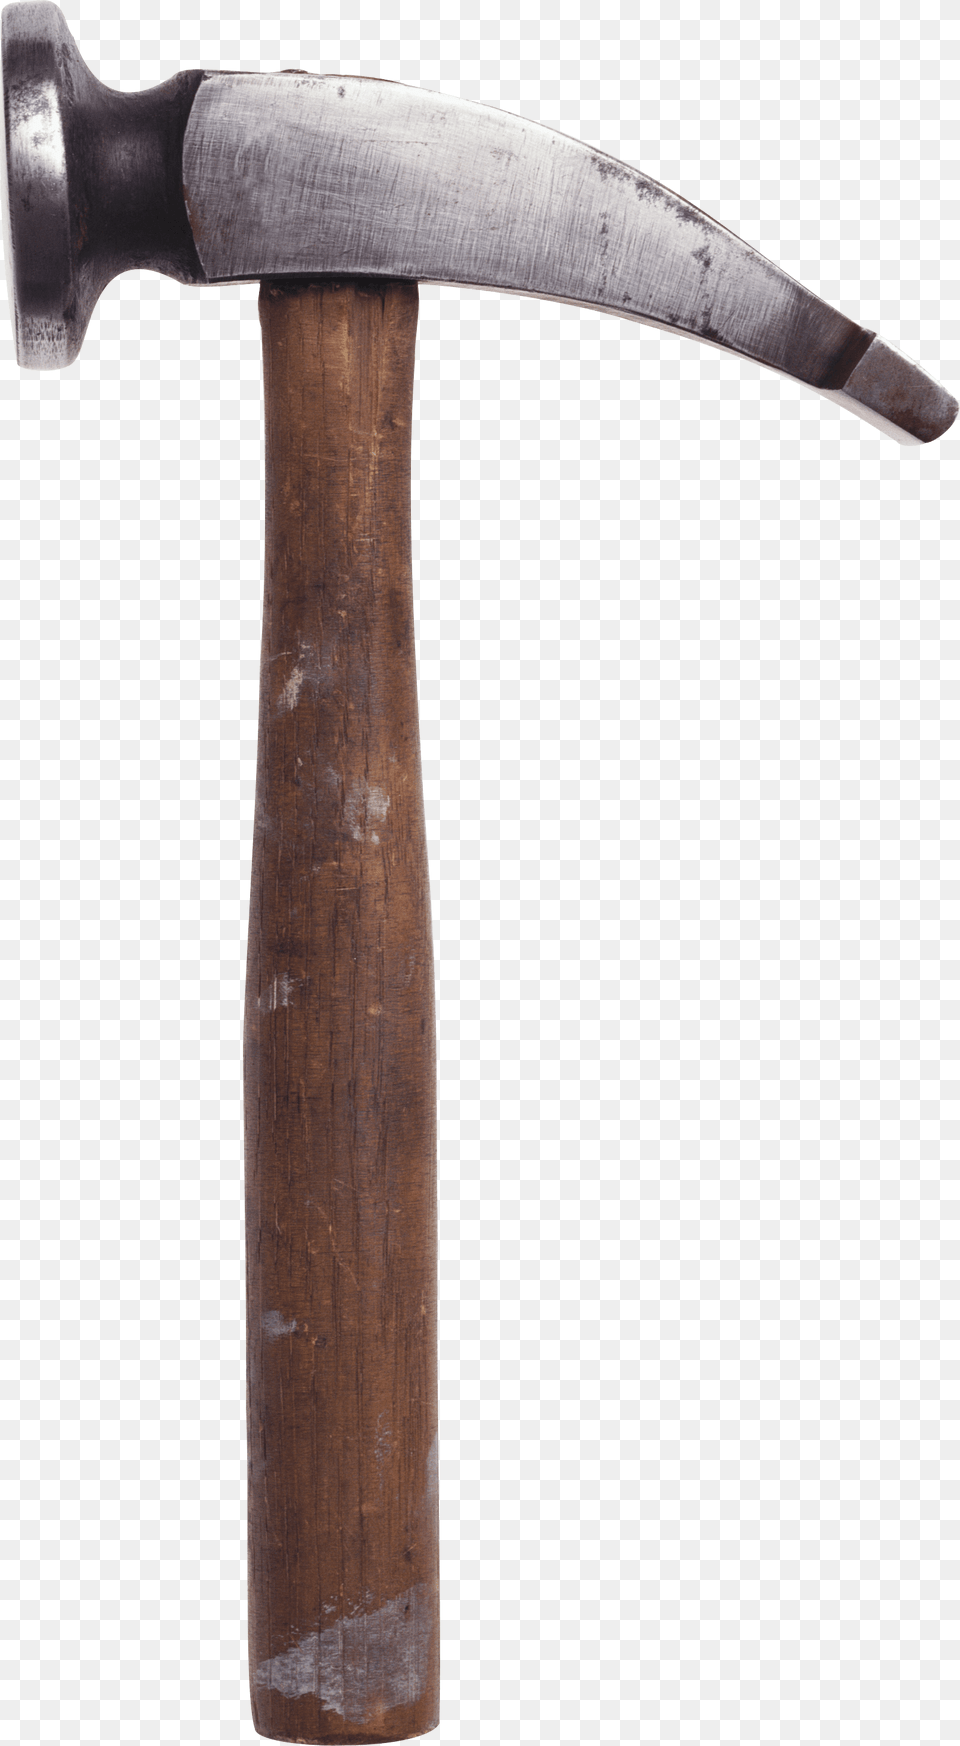 Vintage Hammer Vintage Hammer, Device, Axe, Tool, Weapon Png Image